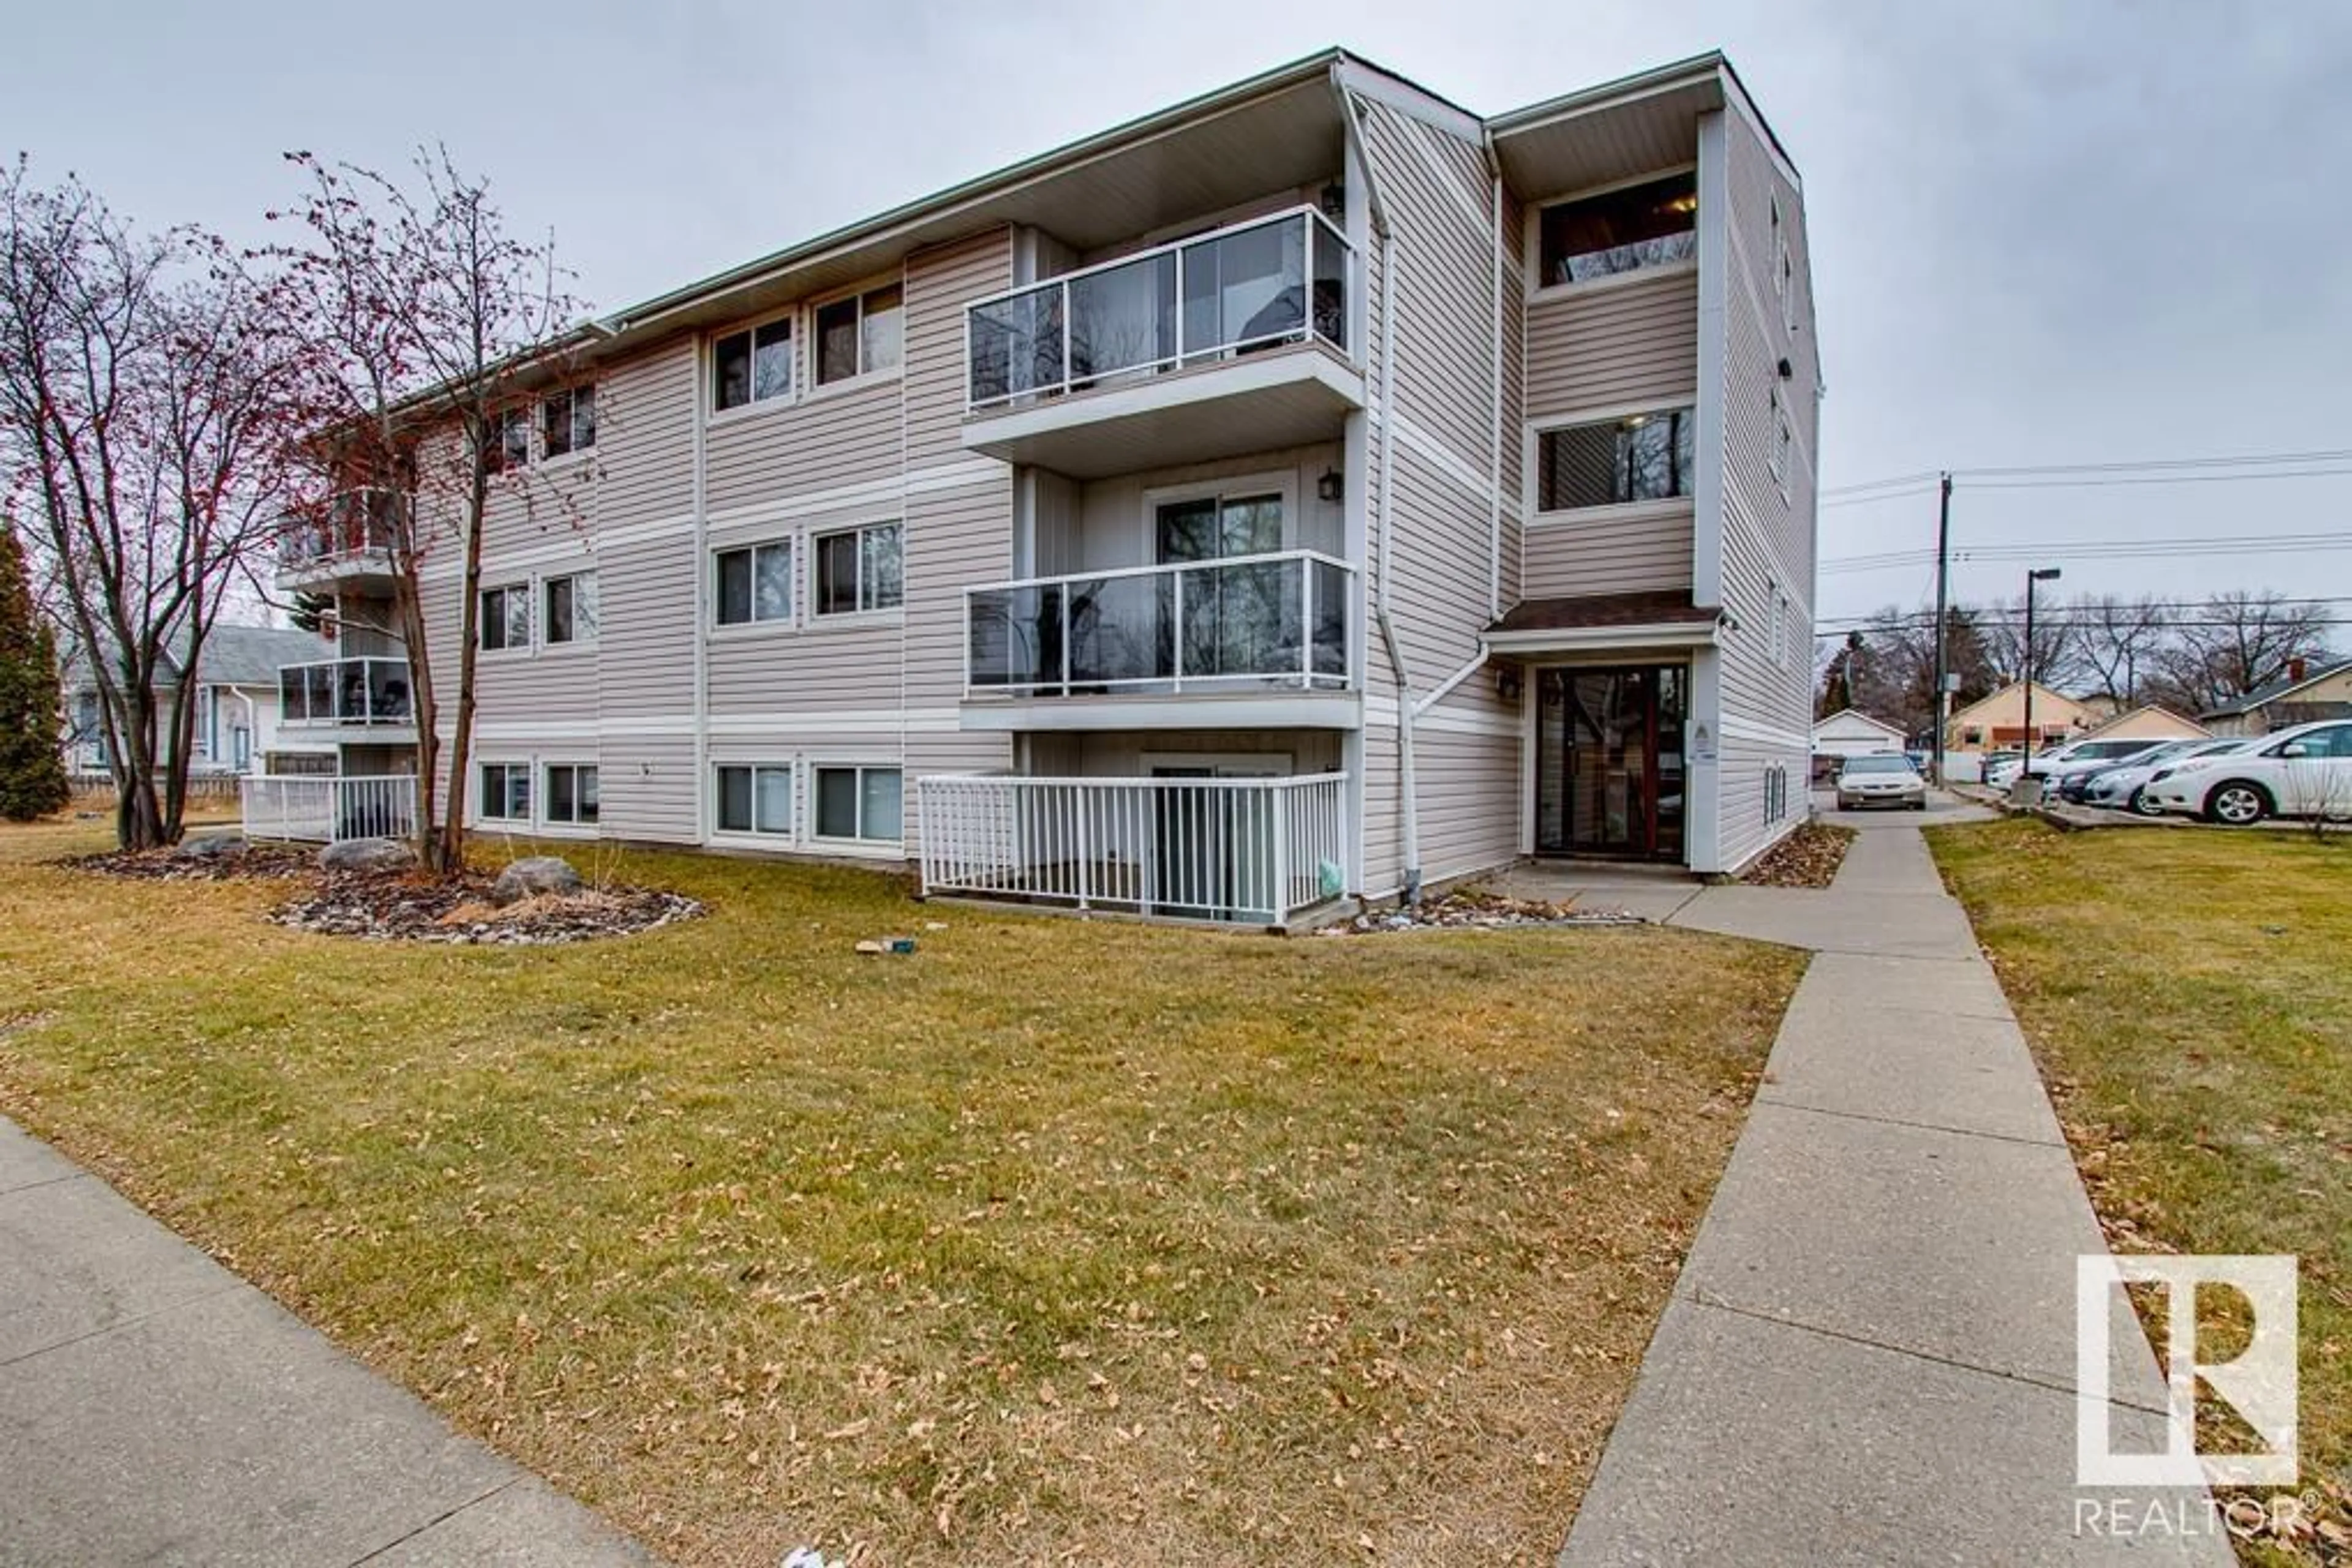 A pic from exterior of the house or condo for #104 11324 97 ST NW, Edmonton Alberta T5G1X4